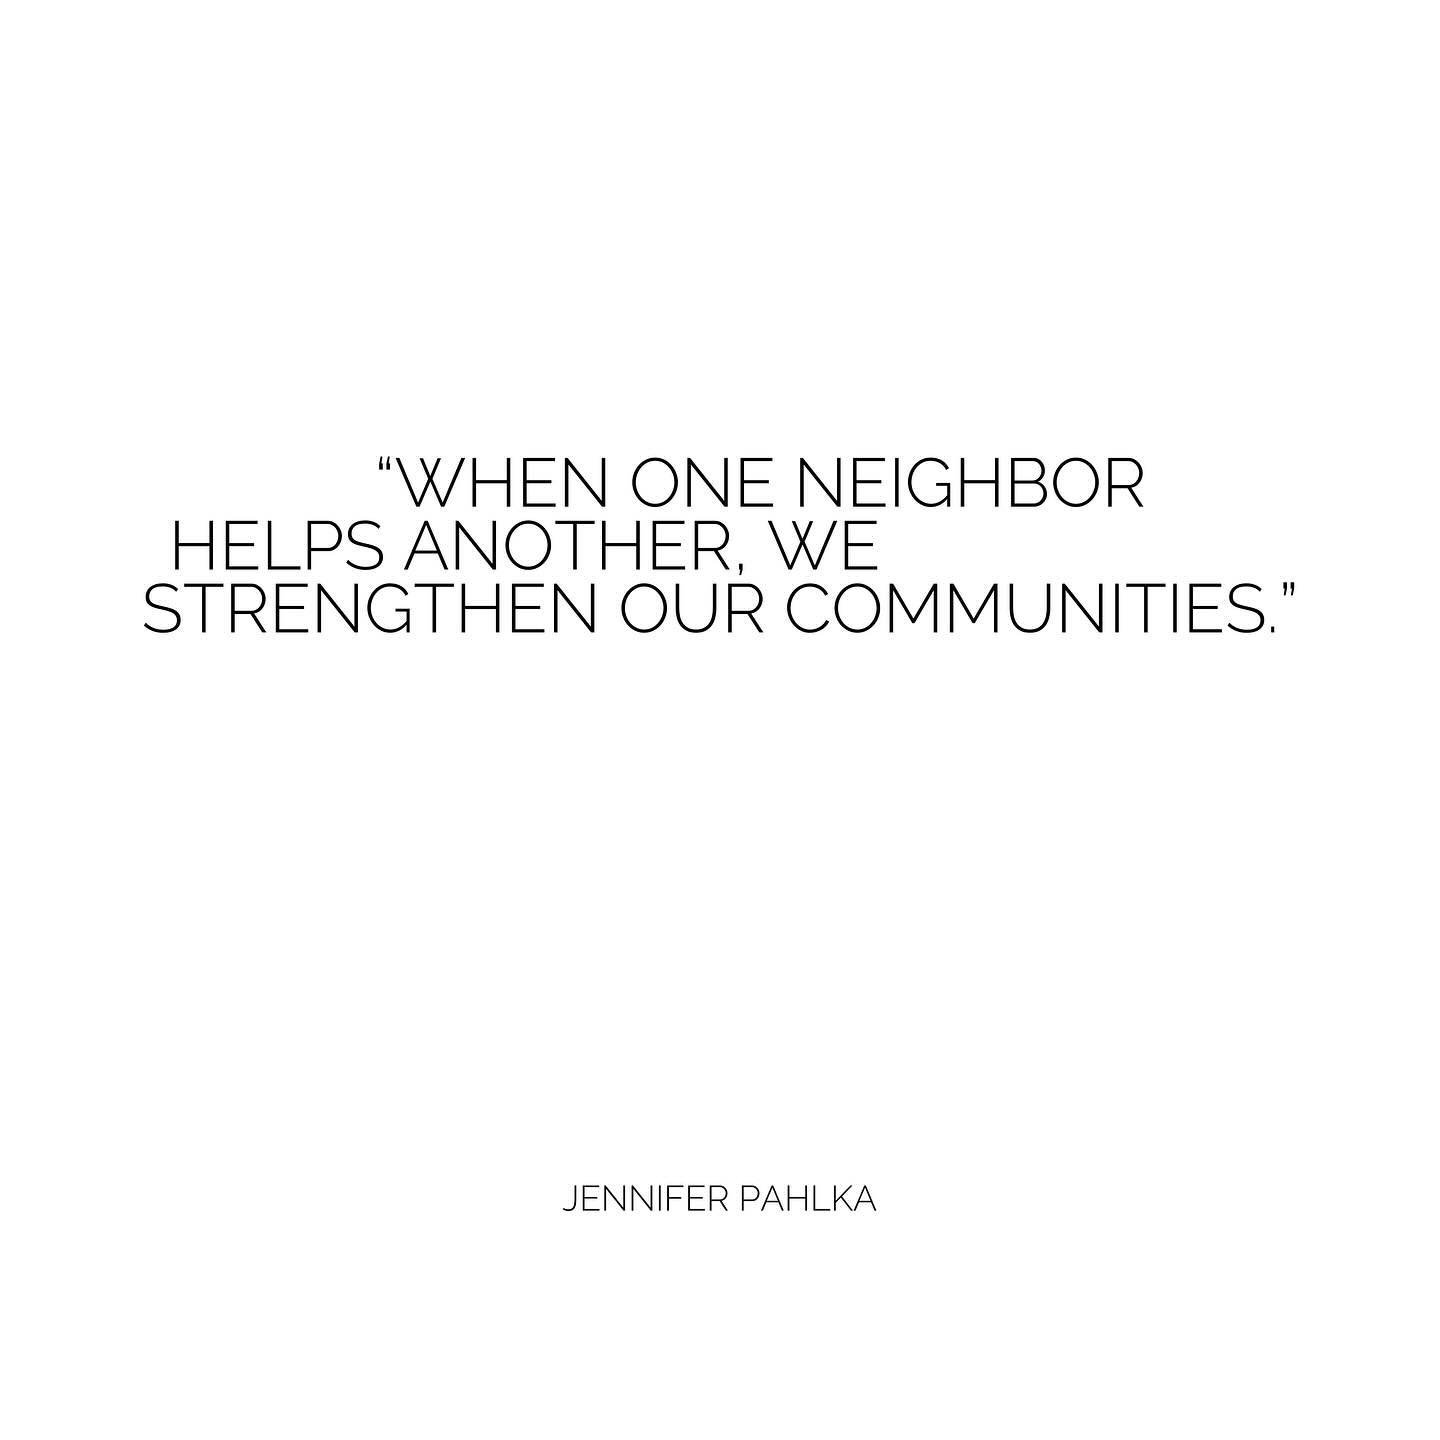 &ldquo;Neighbors helping neighbors&rdquo; is a core mission of one of Mount Pleasant&rsquo;s oldest non-profit organizations. During the start of the pandemic, we had the privilege of assisting East Cooper Community Outreach reorganize their Wellness